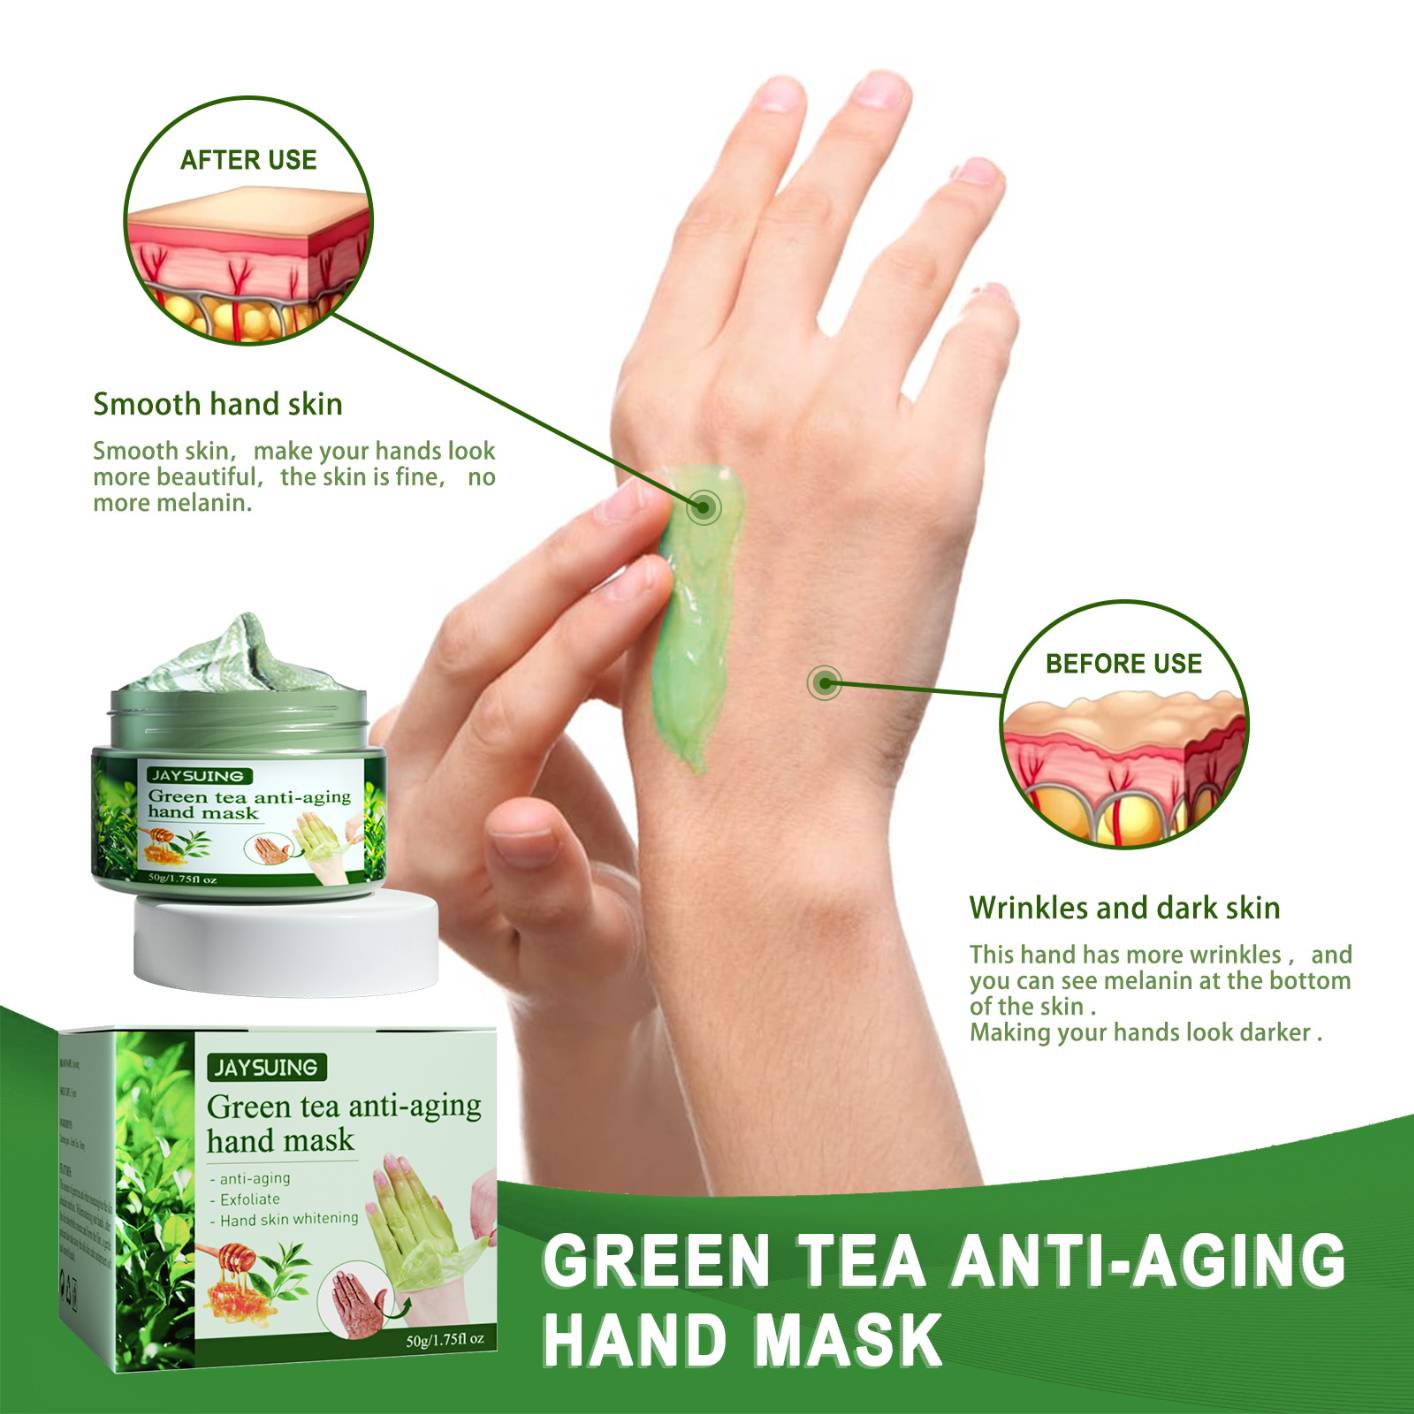 Jaysuing Green Tea Hand Mask Moisture Exfoliating Wrinkle Removal Smooth Firming Moist Repair Calluses Skin Care Anti-Aging